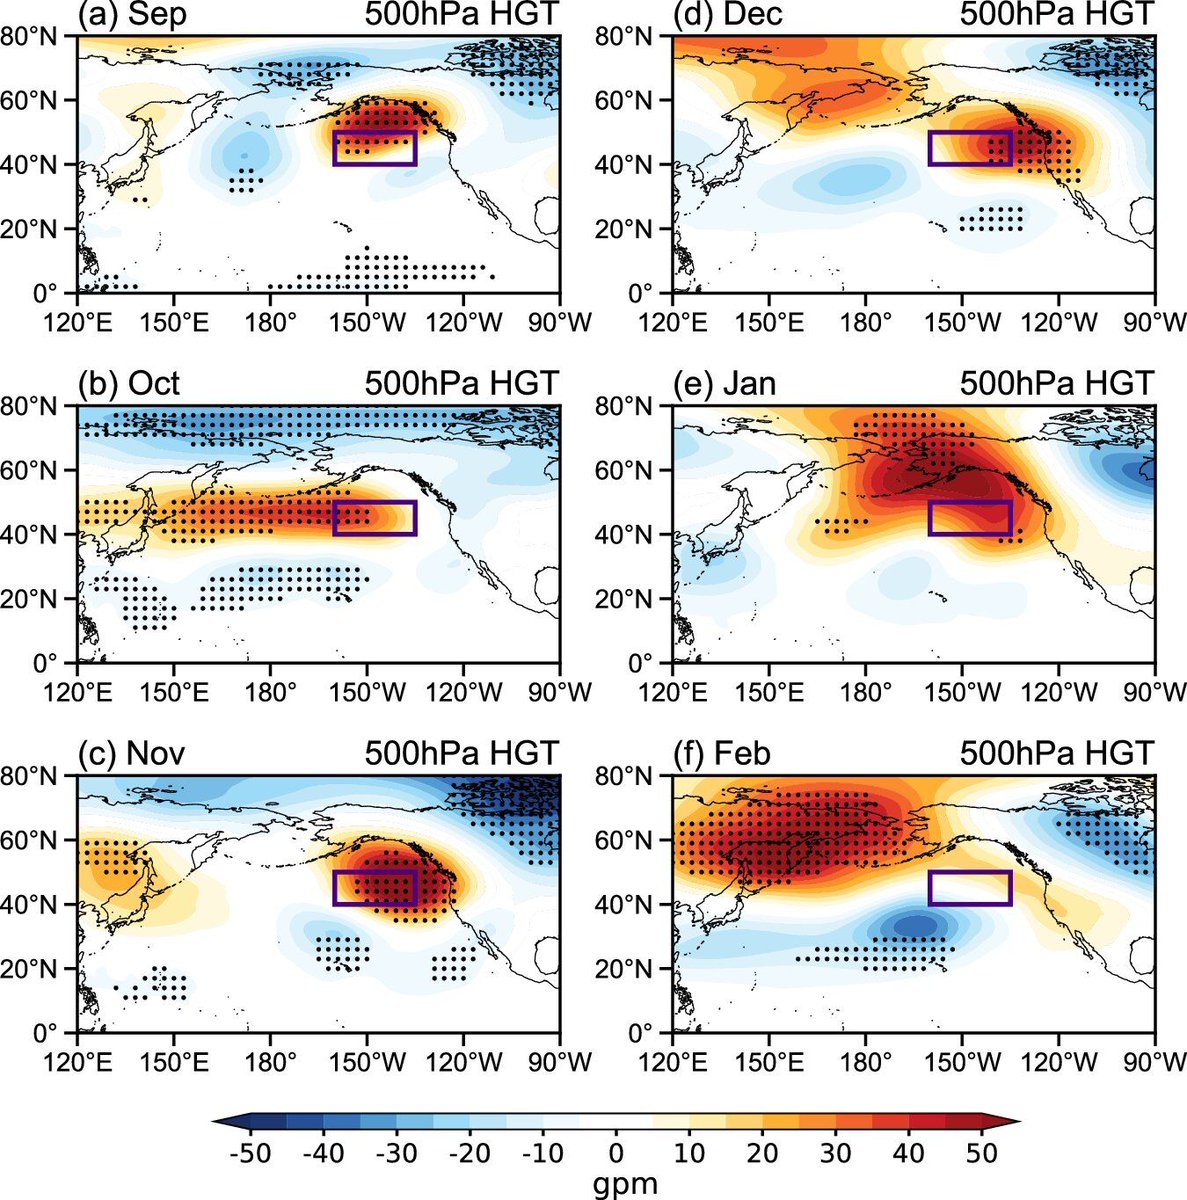 Atmospheric 'teleconnections' sustain warm blobs in the northeast Pacific Ocean buff.ly/4aYUVQH via @physorg_com